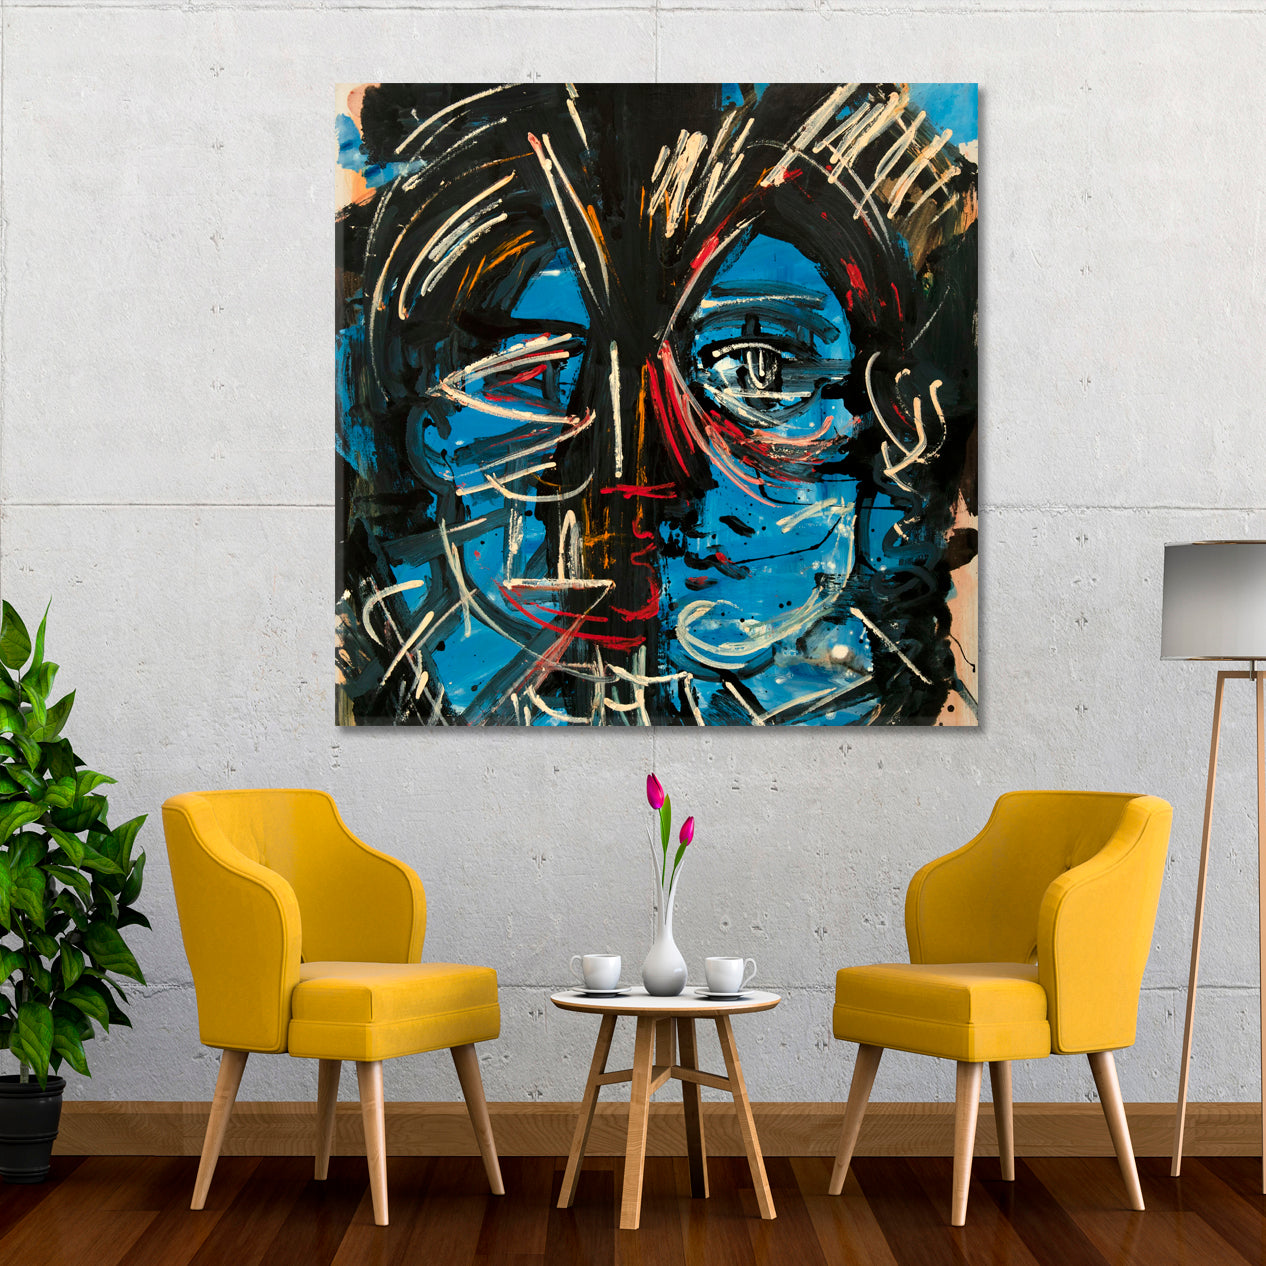 FRIENDS Portrait Abstract Expressionism Abstract Art Print Artesty 1 Panel 12"x12" 